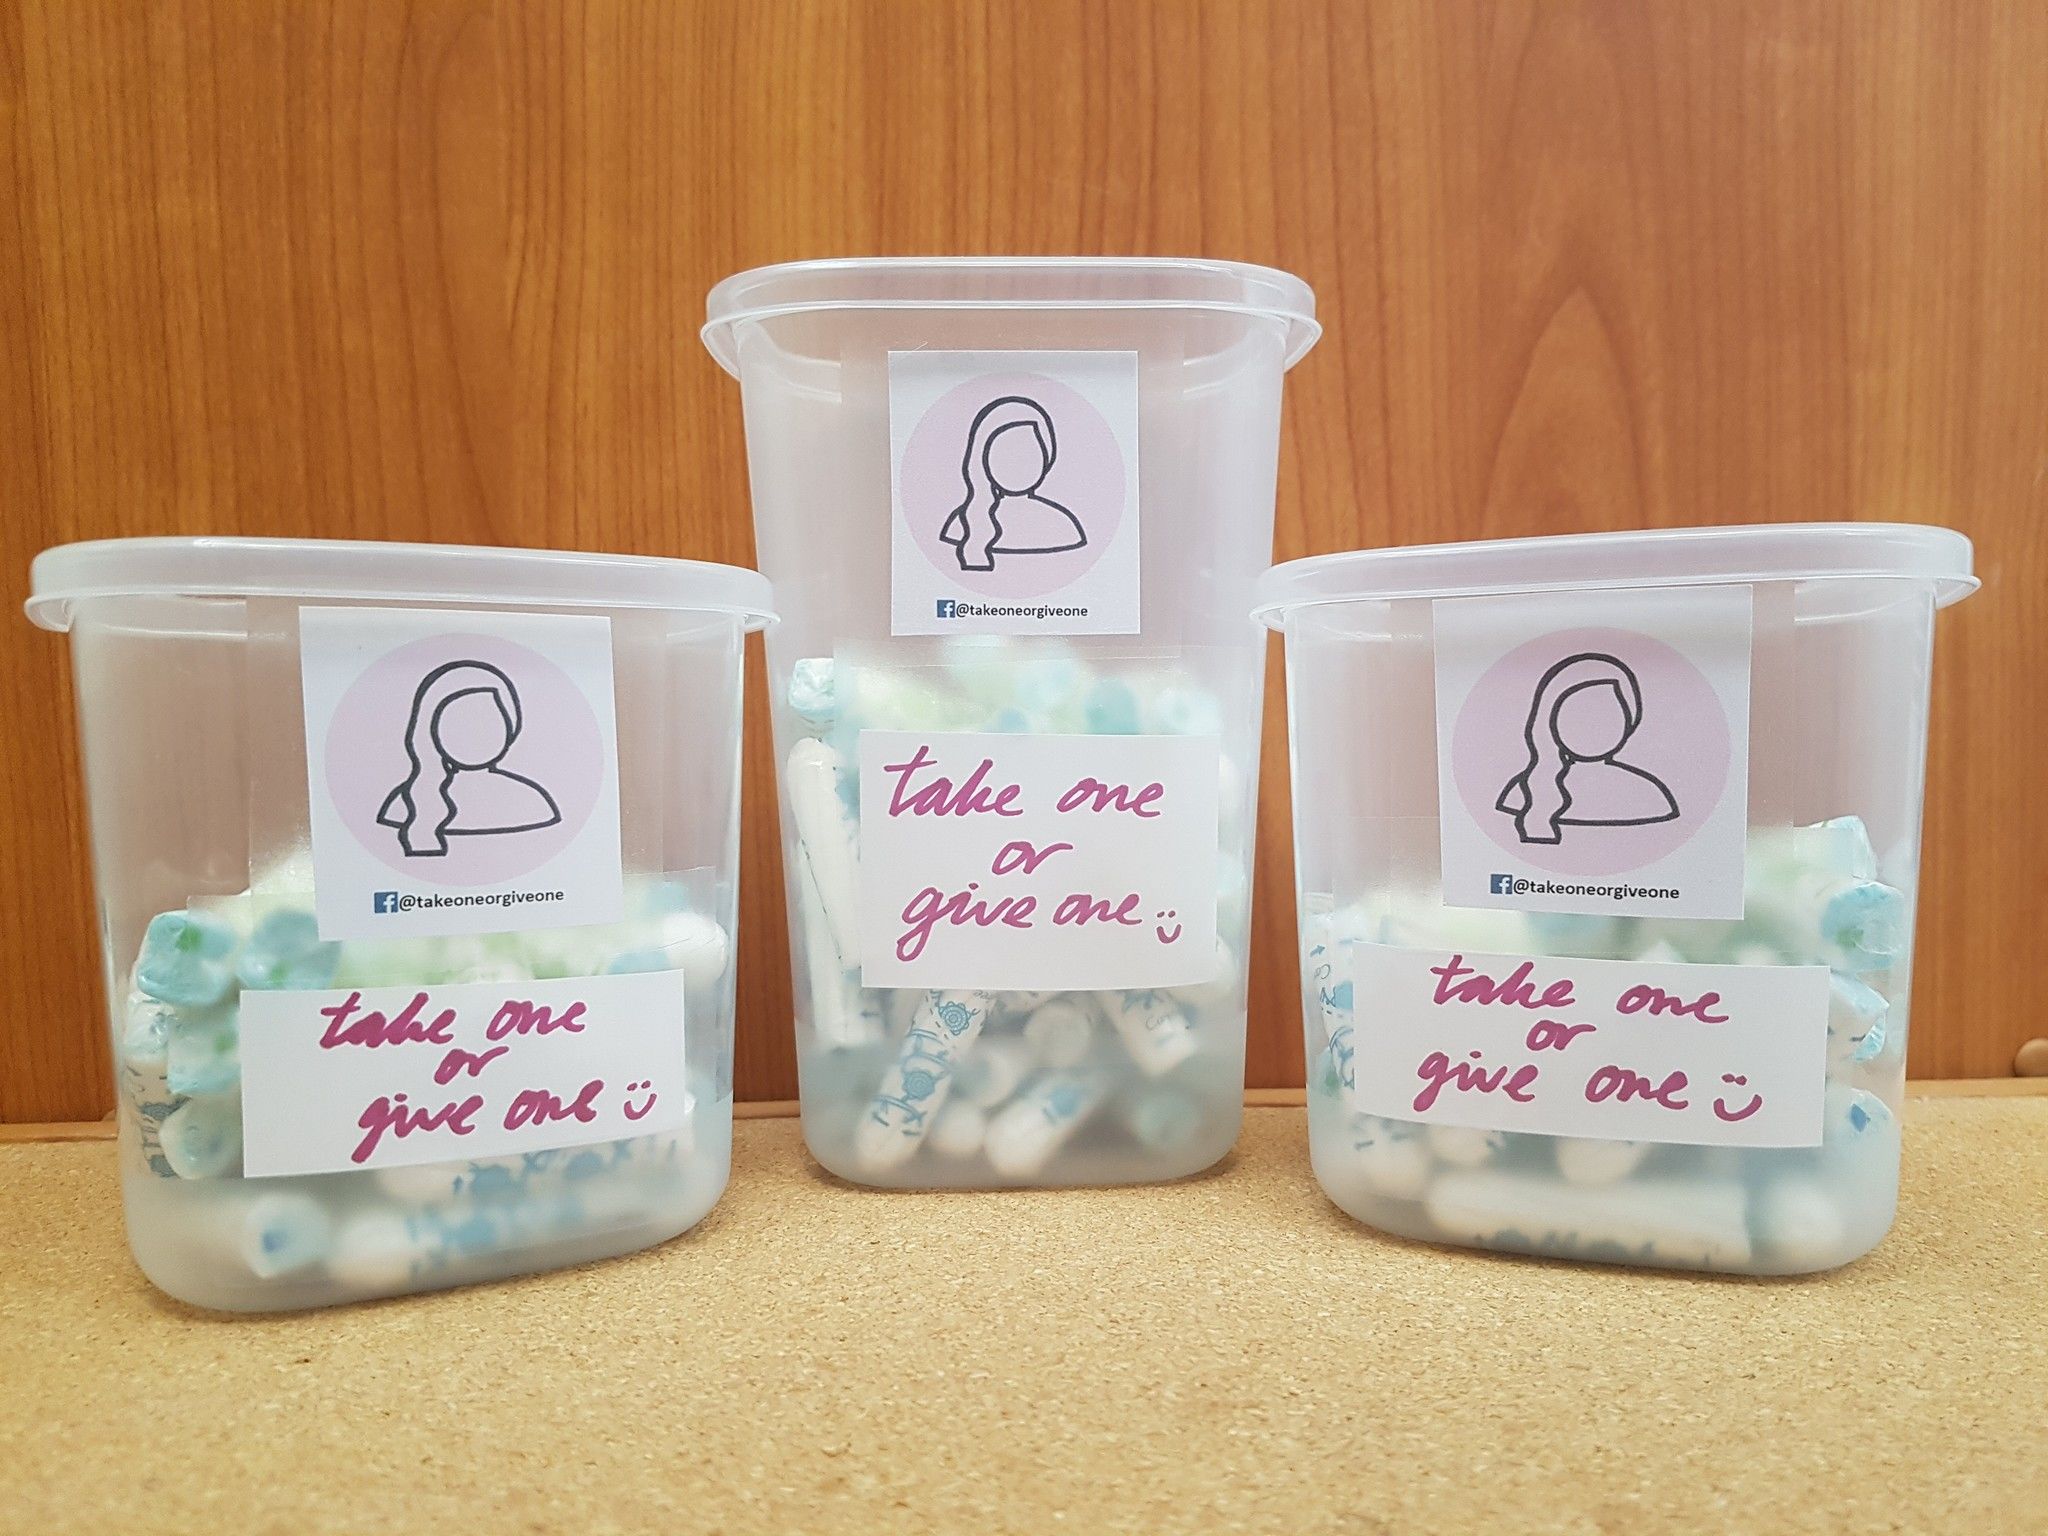 Take One or Give One containers